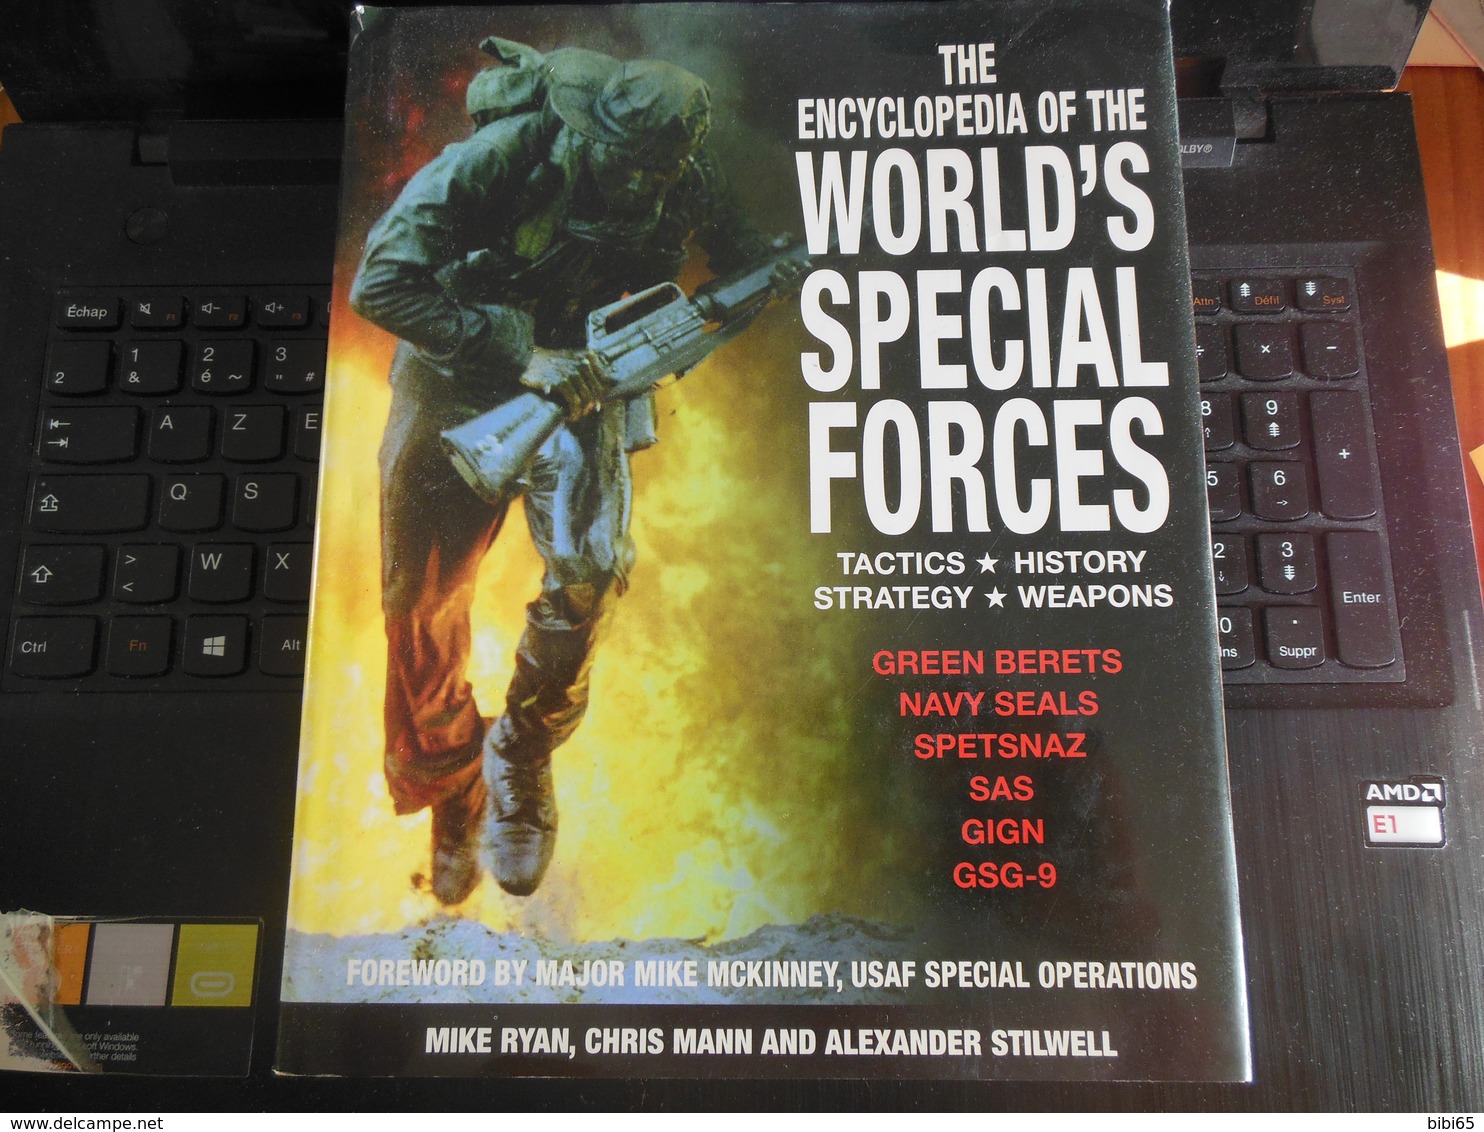 THE ENCYCLOPEDIA OF THE WORLD'S SPECIAL FORCES TACTICS HISTORY STRATEGY WEAPONS GREEN BERETS NAVY SEALS SPETSNAZ SAS - Buitenlandse Legers